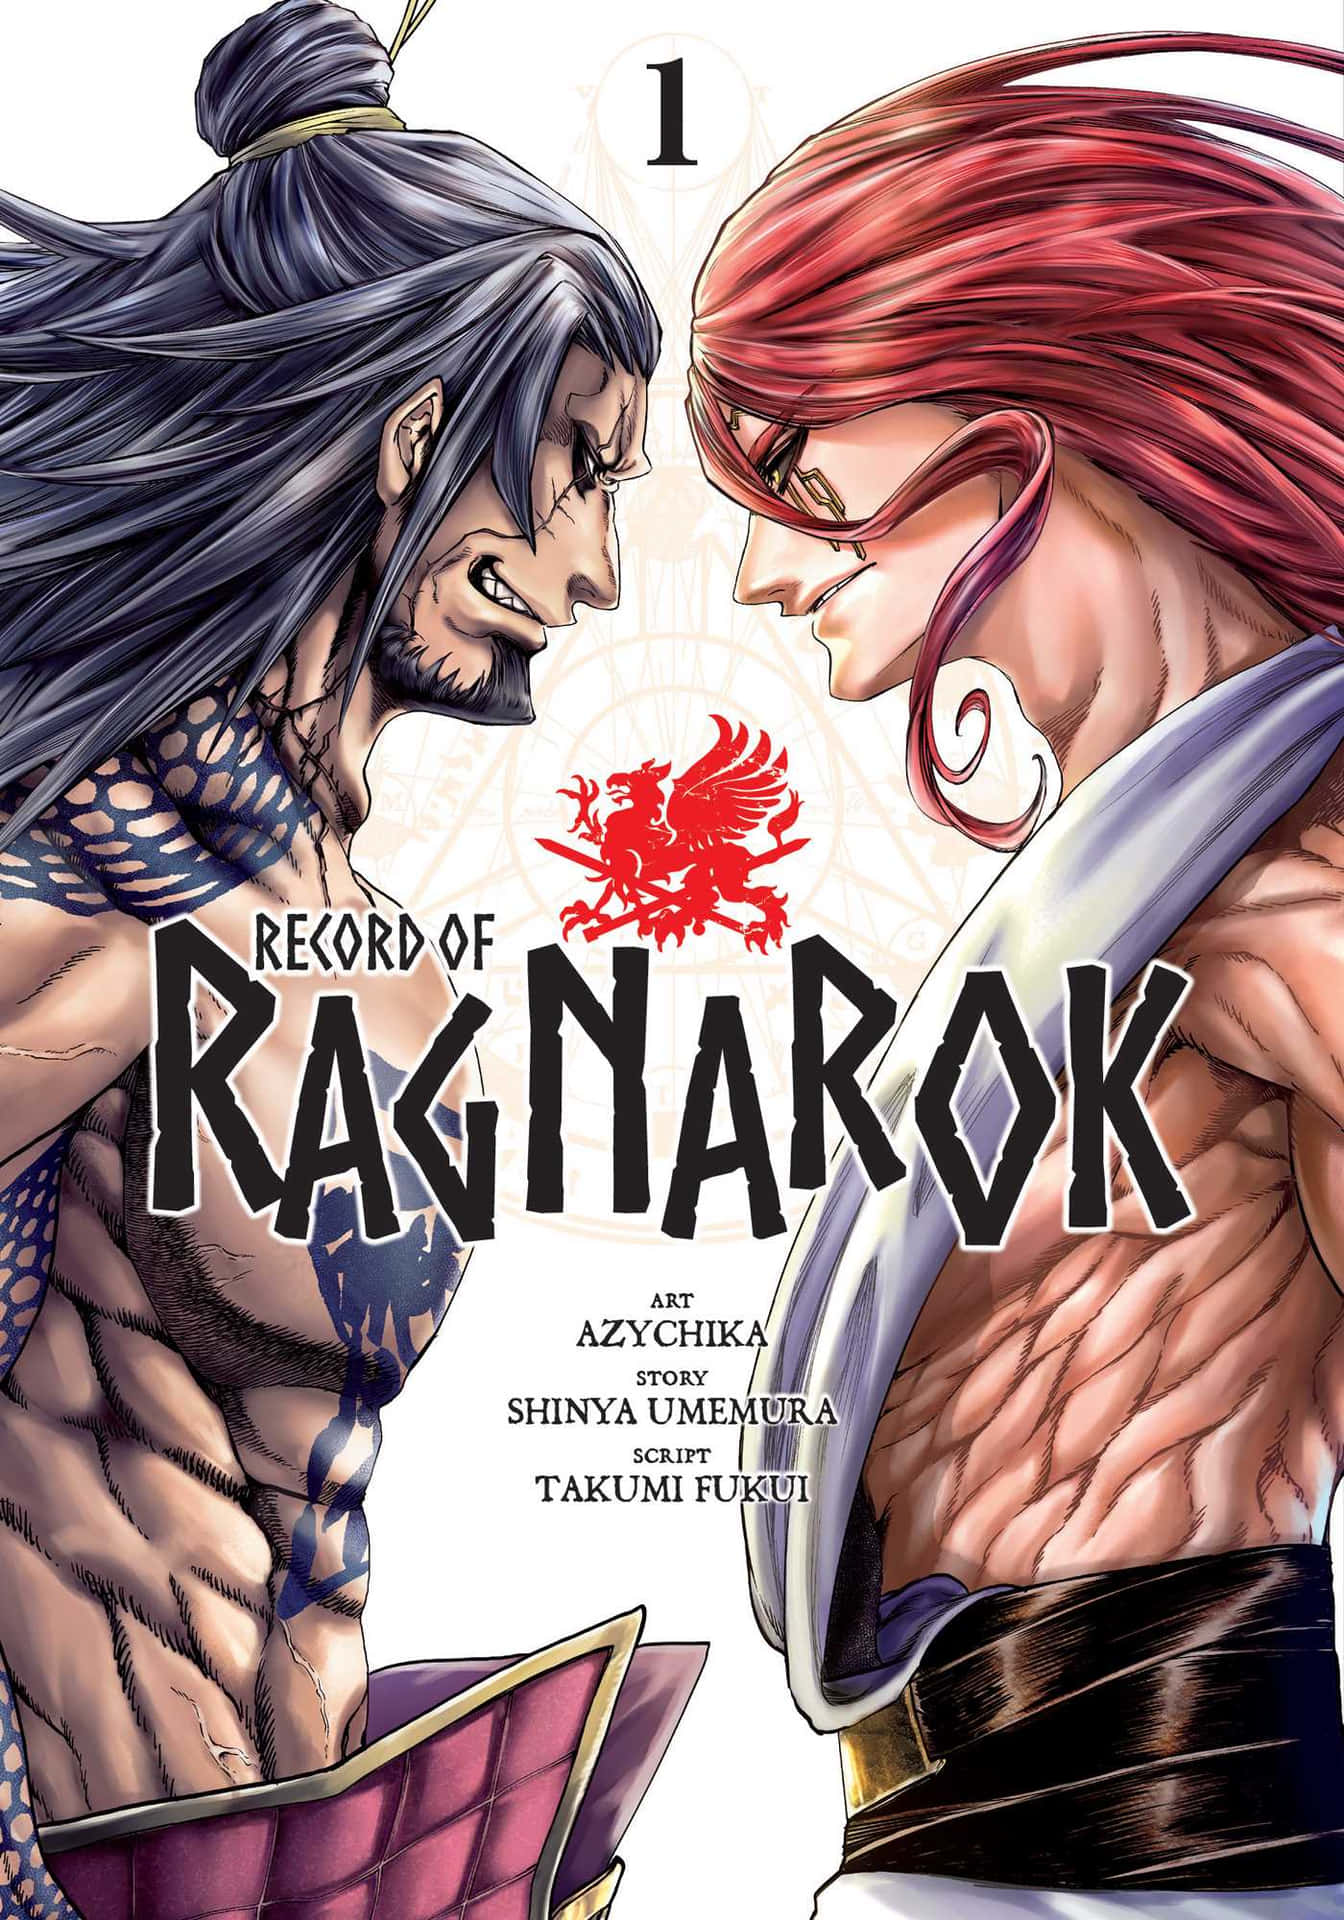 A Closer Look at the Epic Fantasy Anime "Record of Ragnarok"